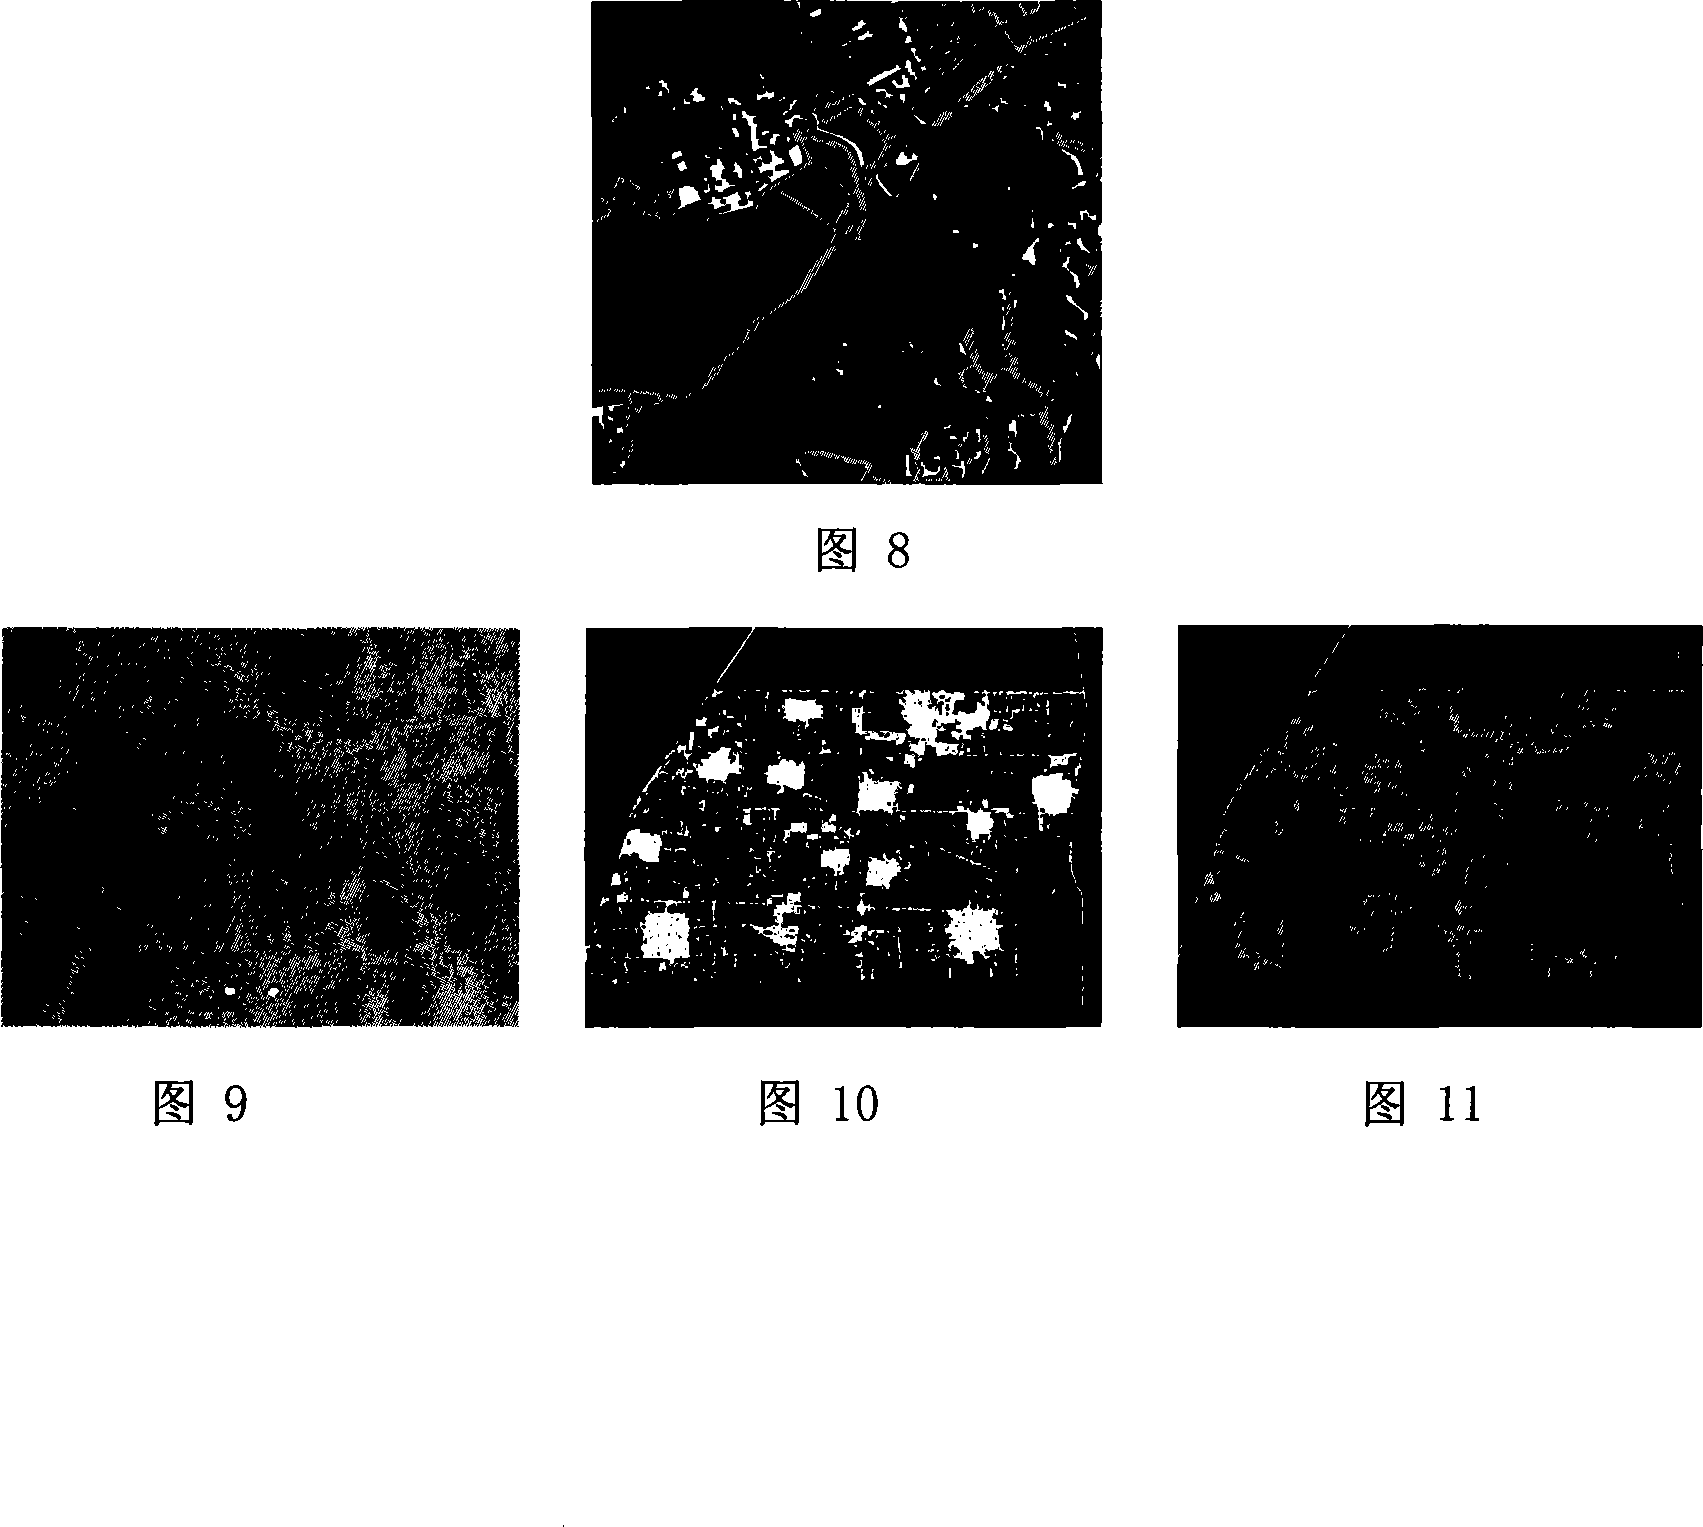 Method for detecting change of water body and settlement place based on aviation video